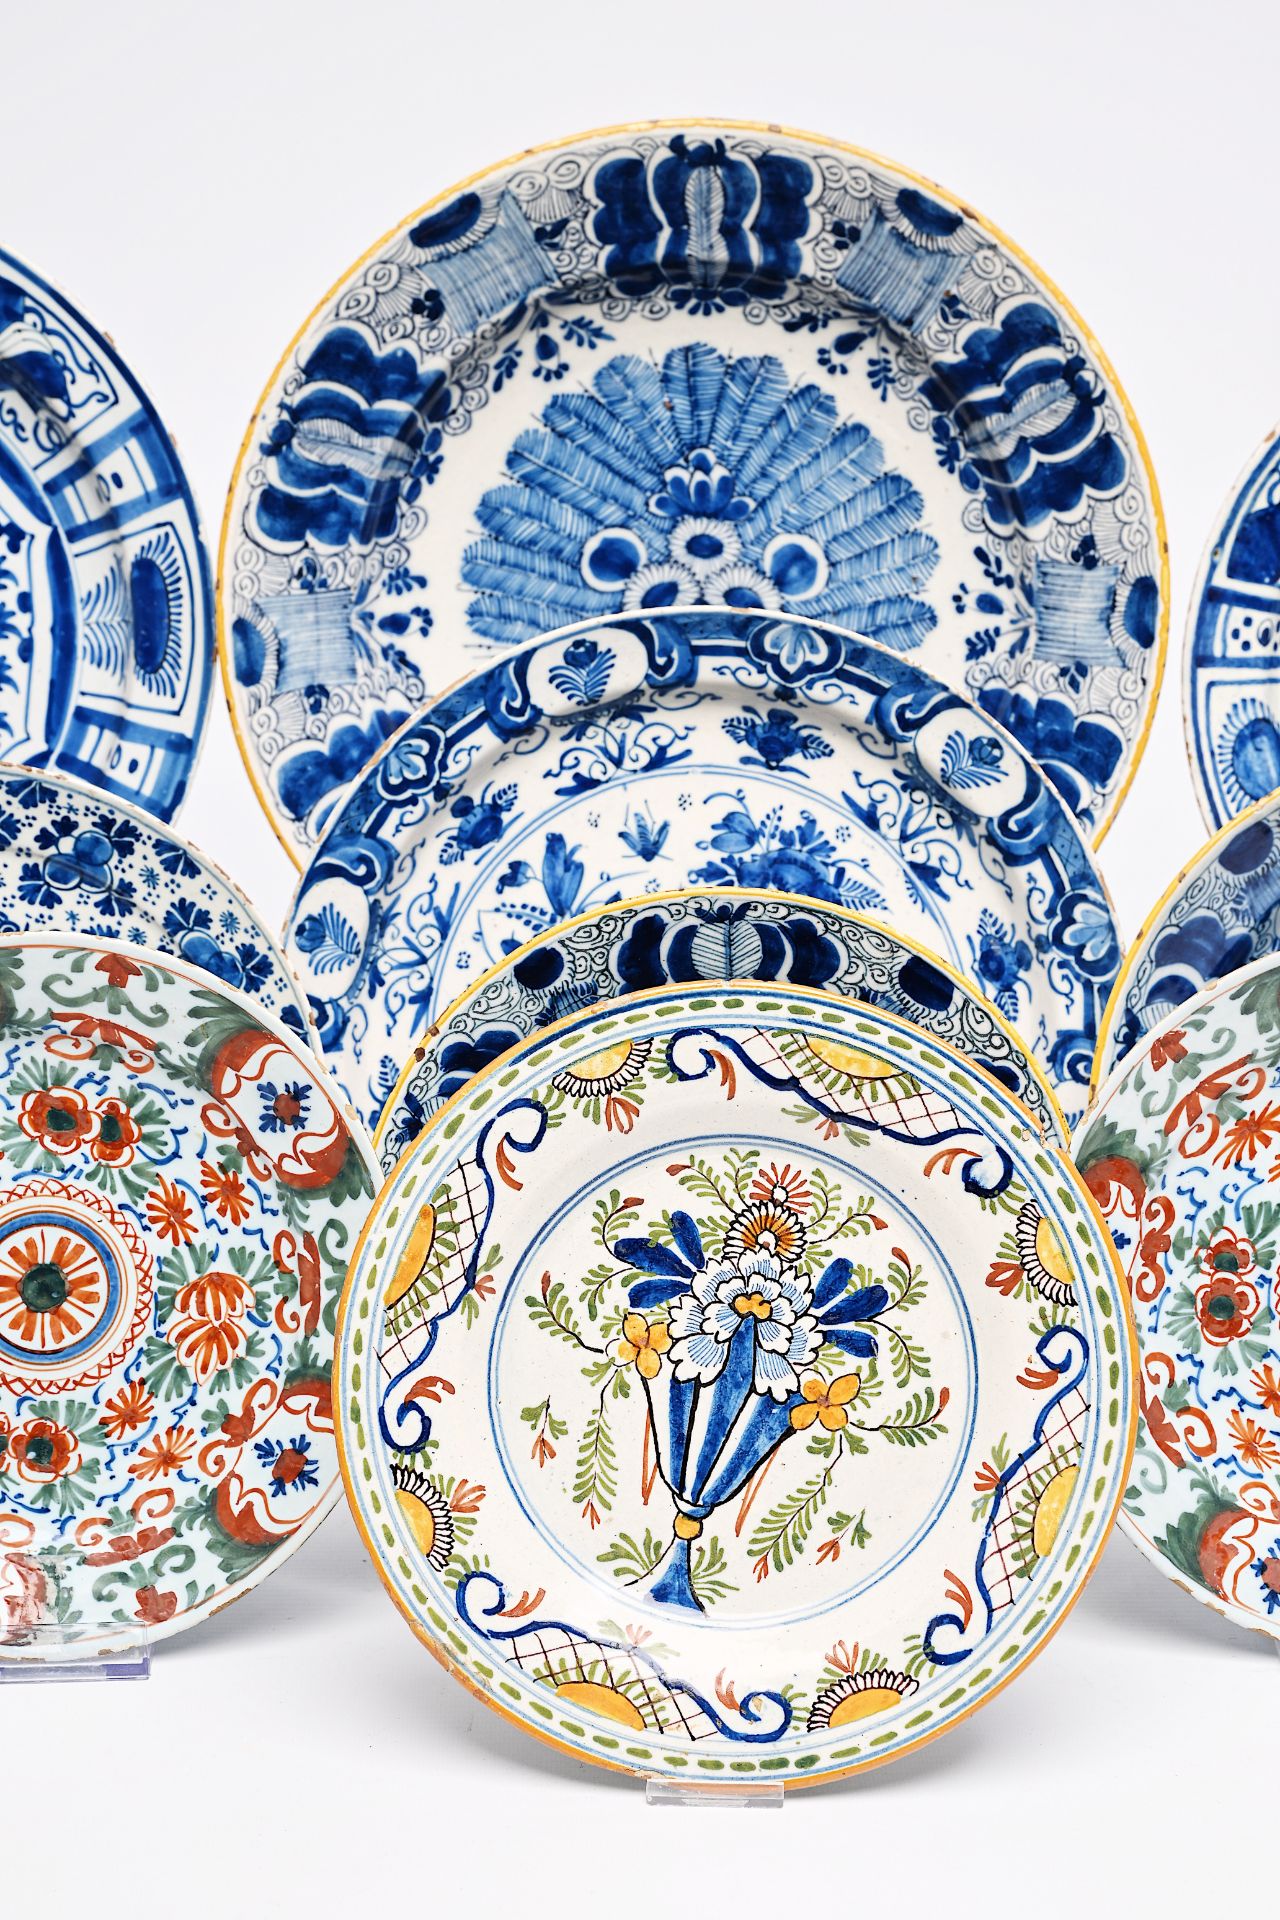 Twelve Dutch Delft blue and white and polychrome plates and dishes, 18th C. - Image 5 of 7